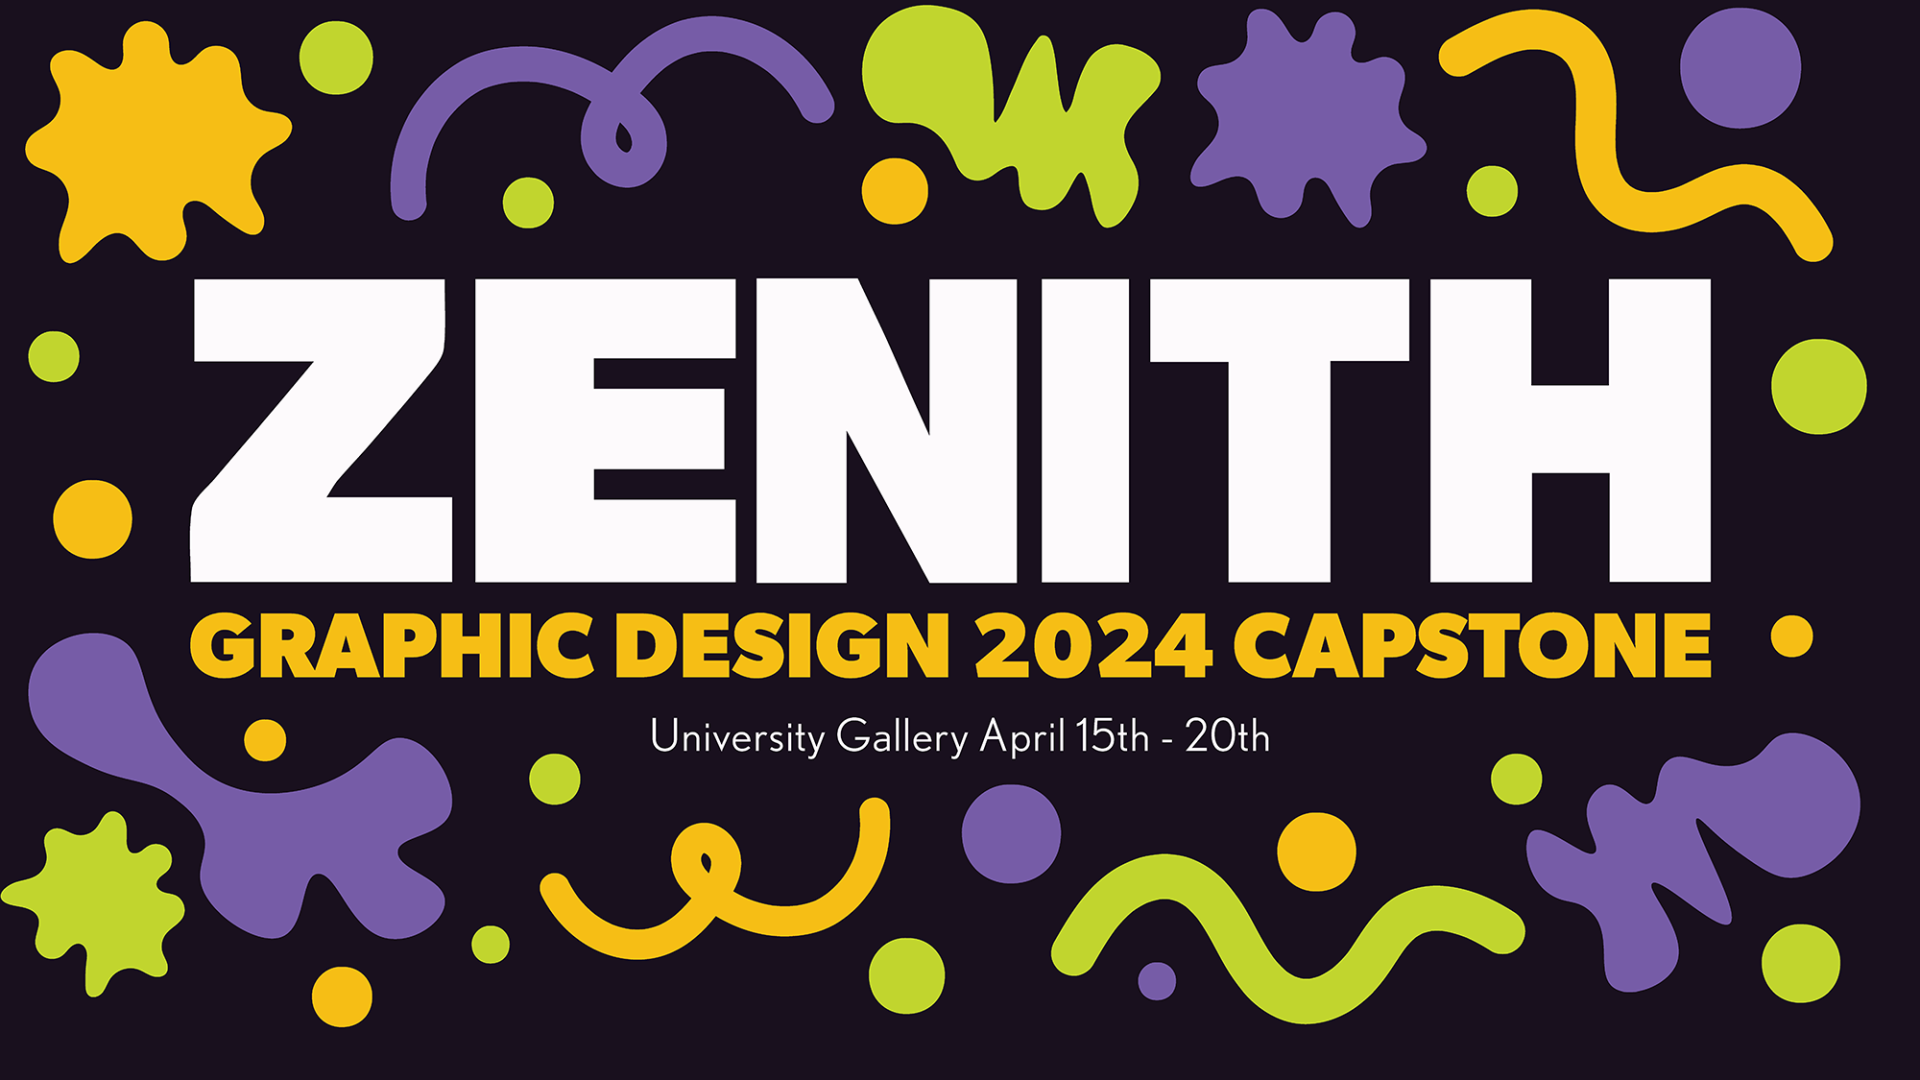 A graphic promoting the graphic design capstone exhibition, with a title of Zenith.